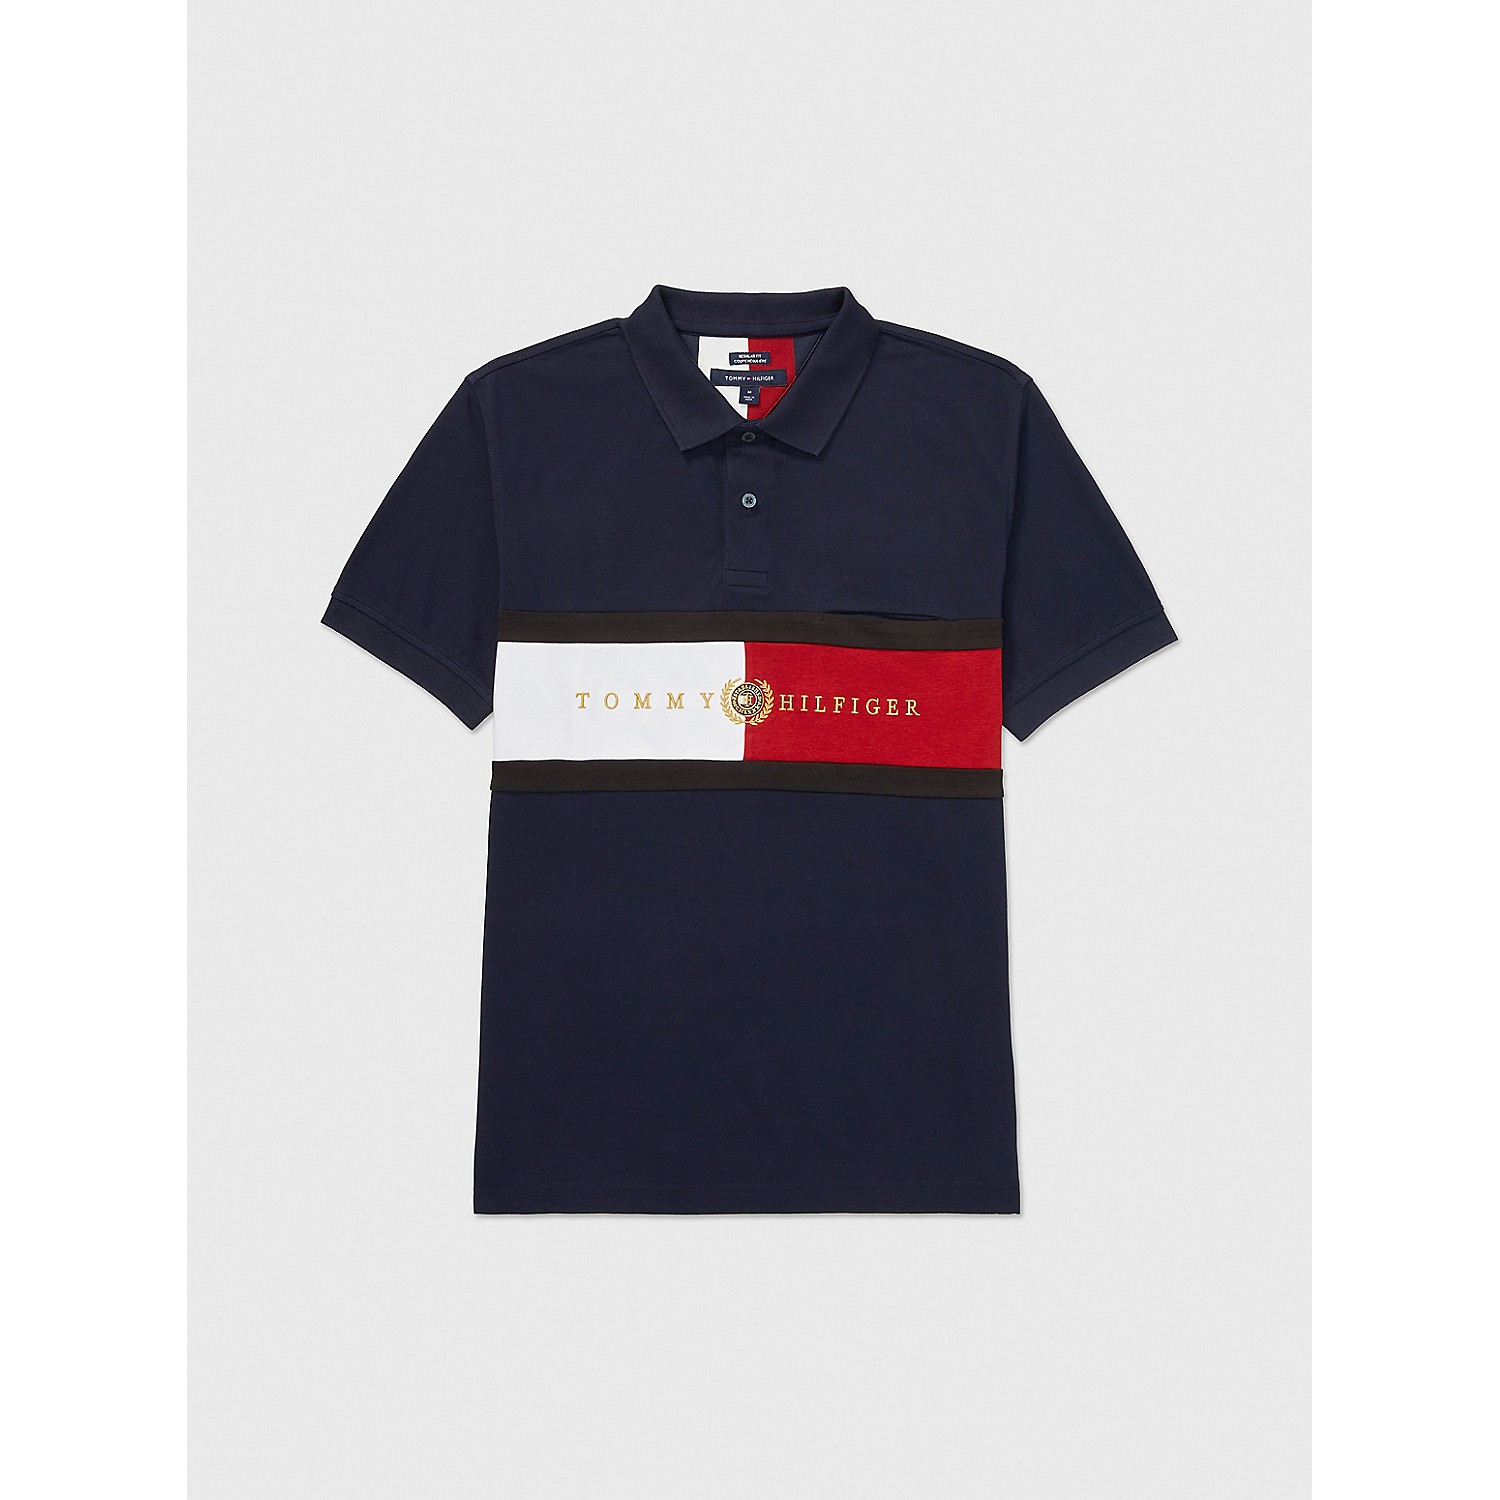 TOMMY ADAPTIVE Port Access Hilfiger Polo